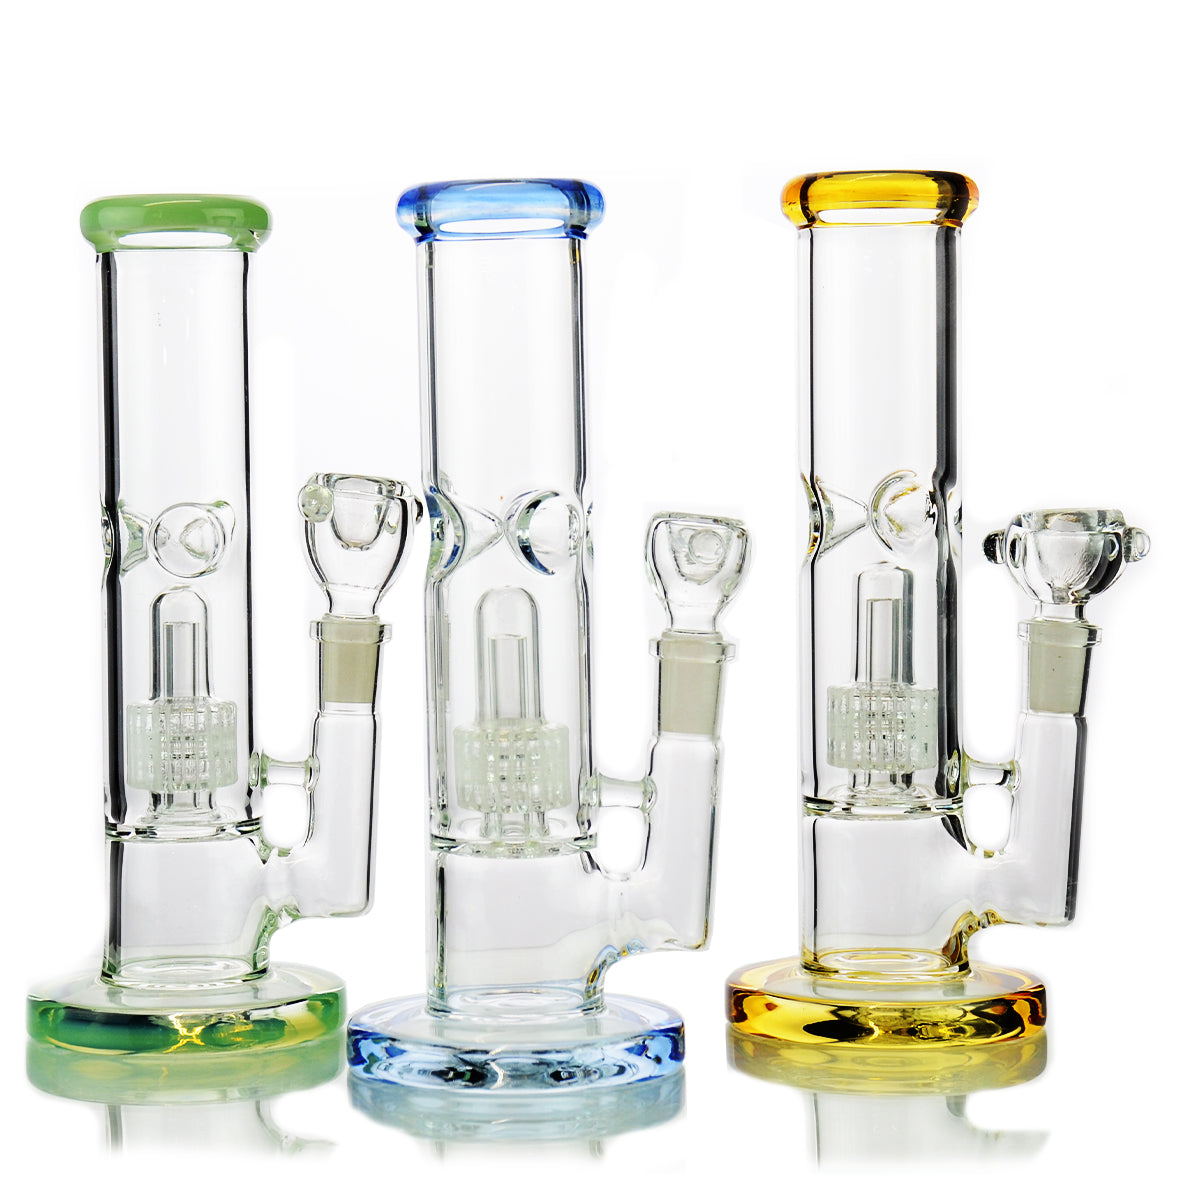 8'' Cylinder with Metrix Shower WATER PIPE 14mm Male Bowl Included : NOTE : ONLY GREEN COLOR AVAILABL